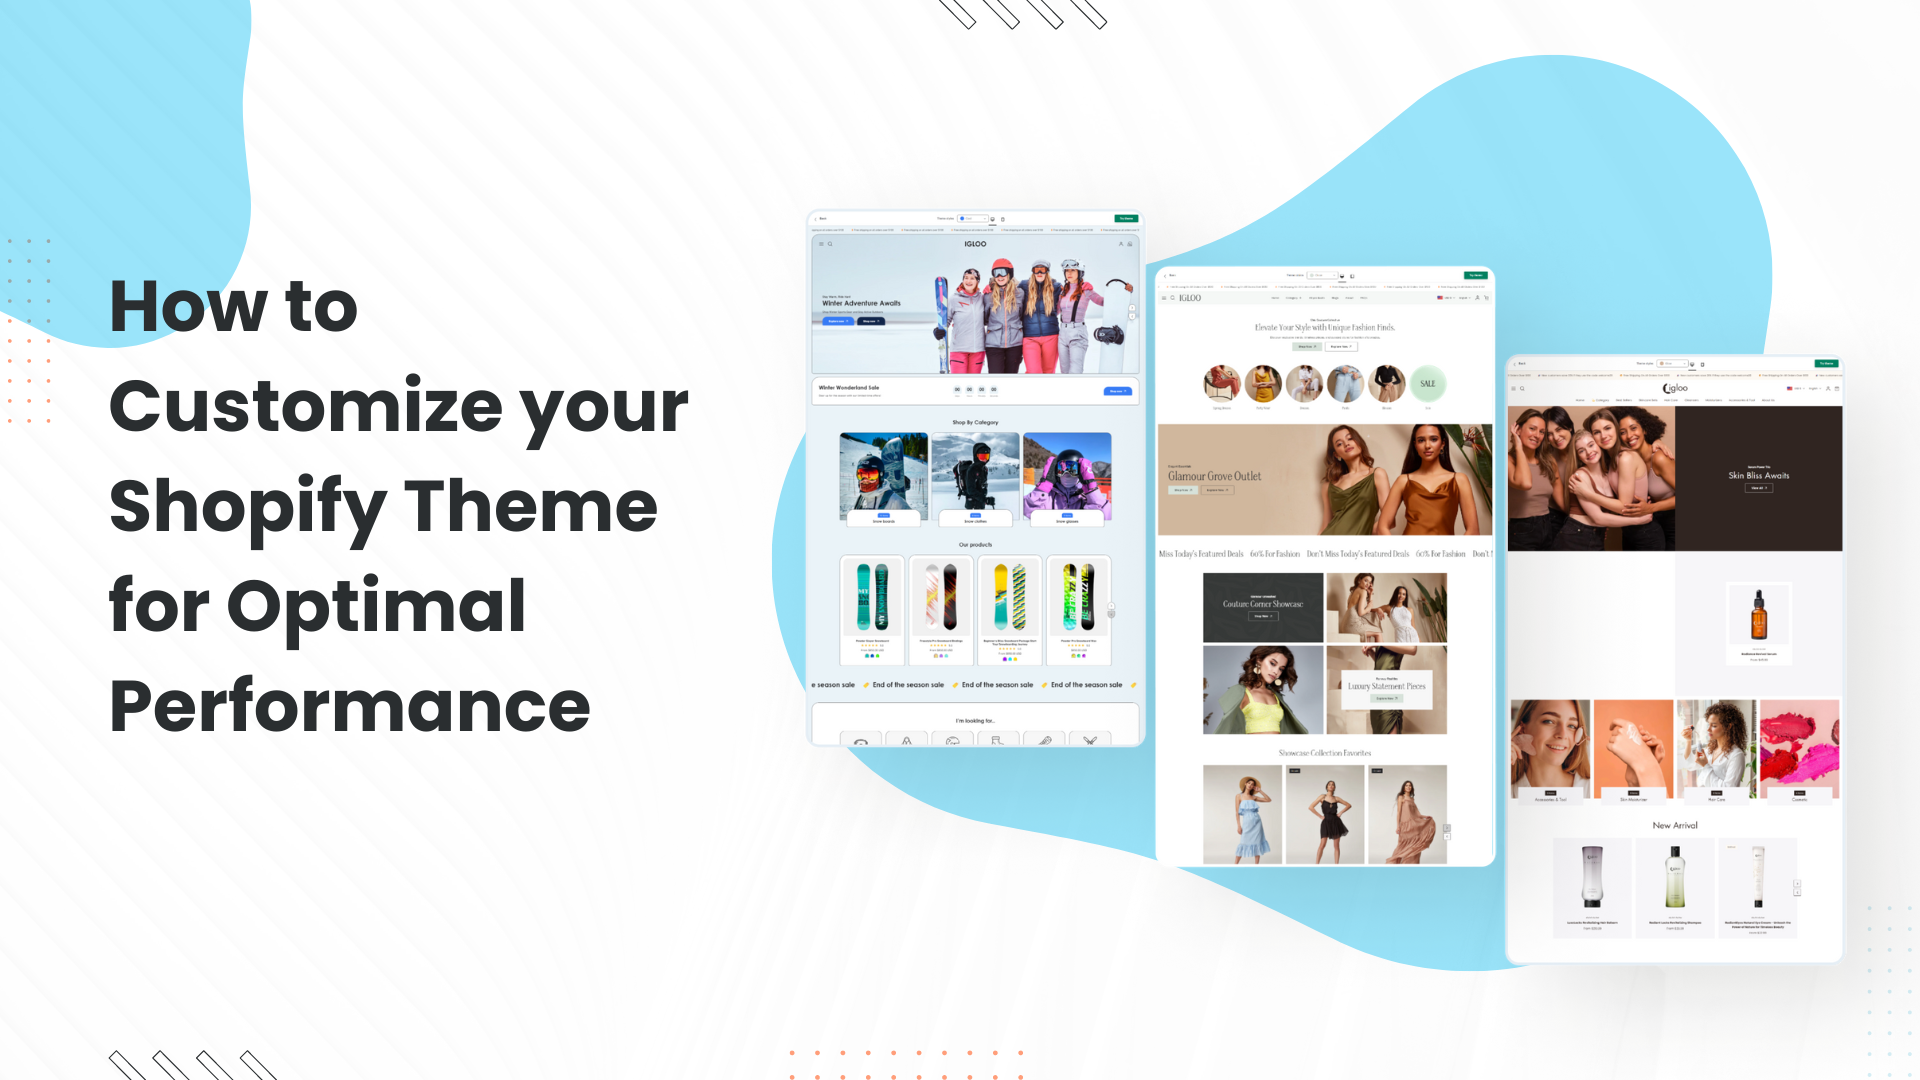 How to Customize Your Shopify Theme for Optimal Performance